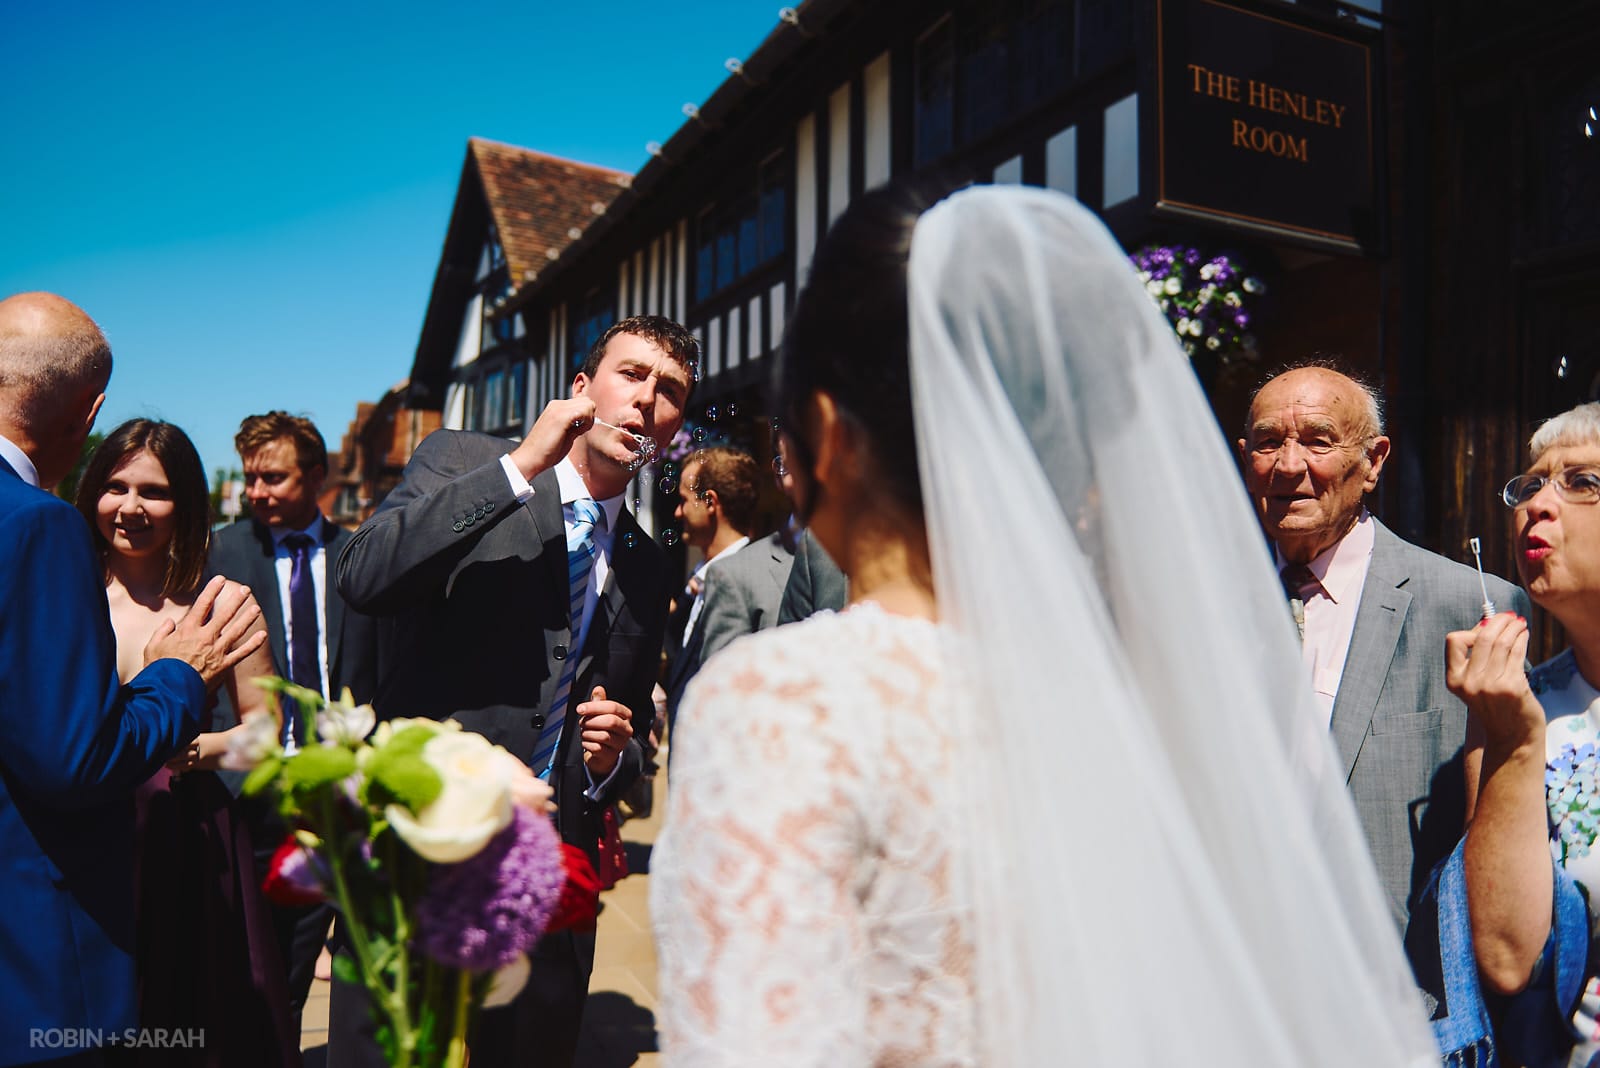 Natural and relaxed wedding photography at Henley Room in Stratford upon Avon